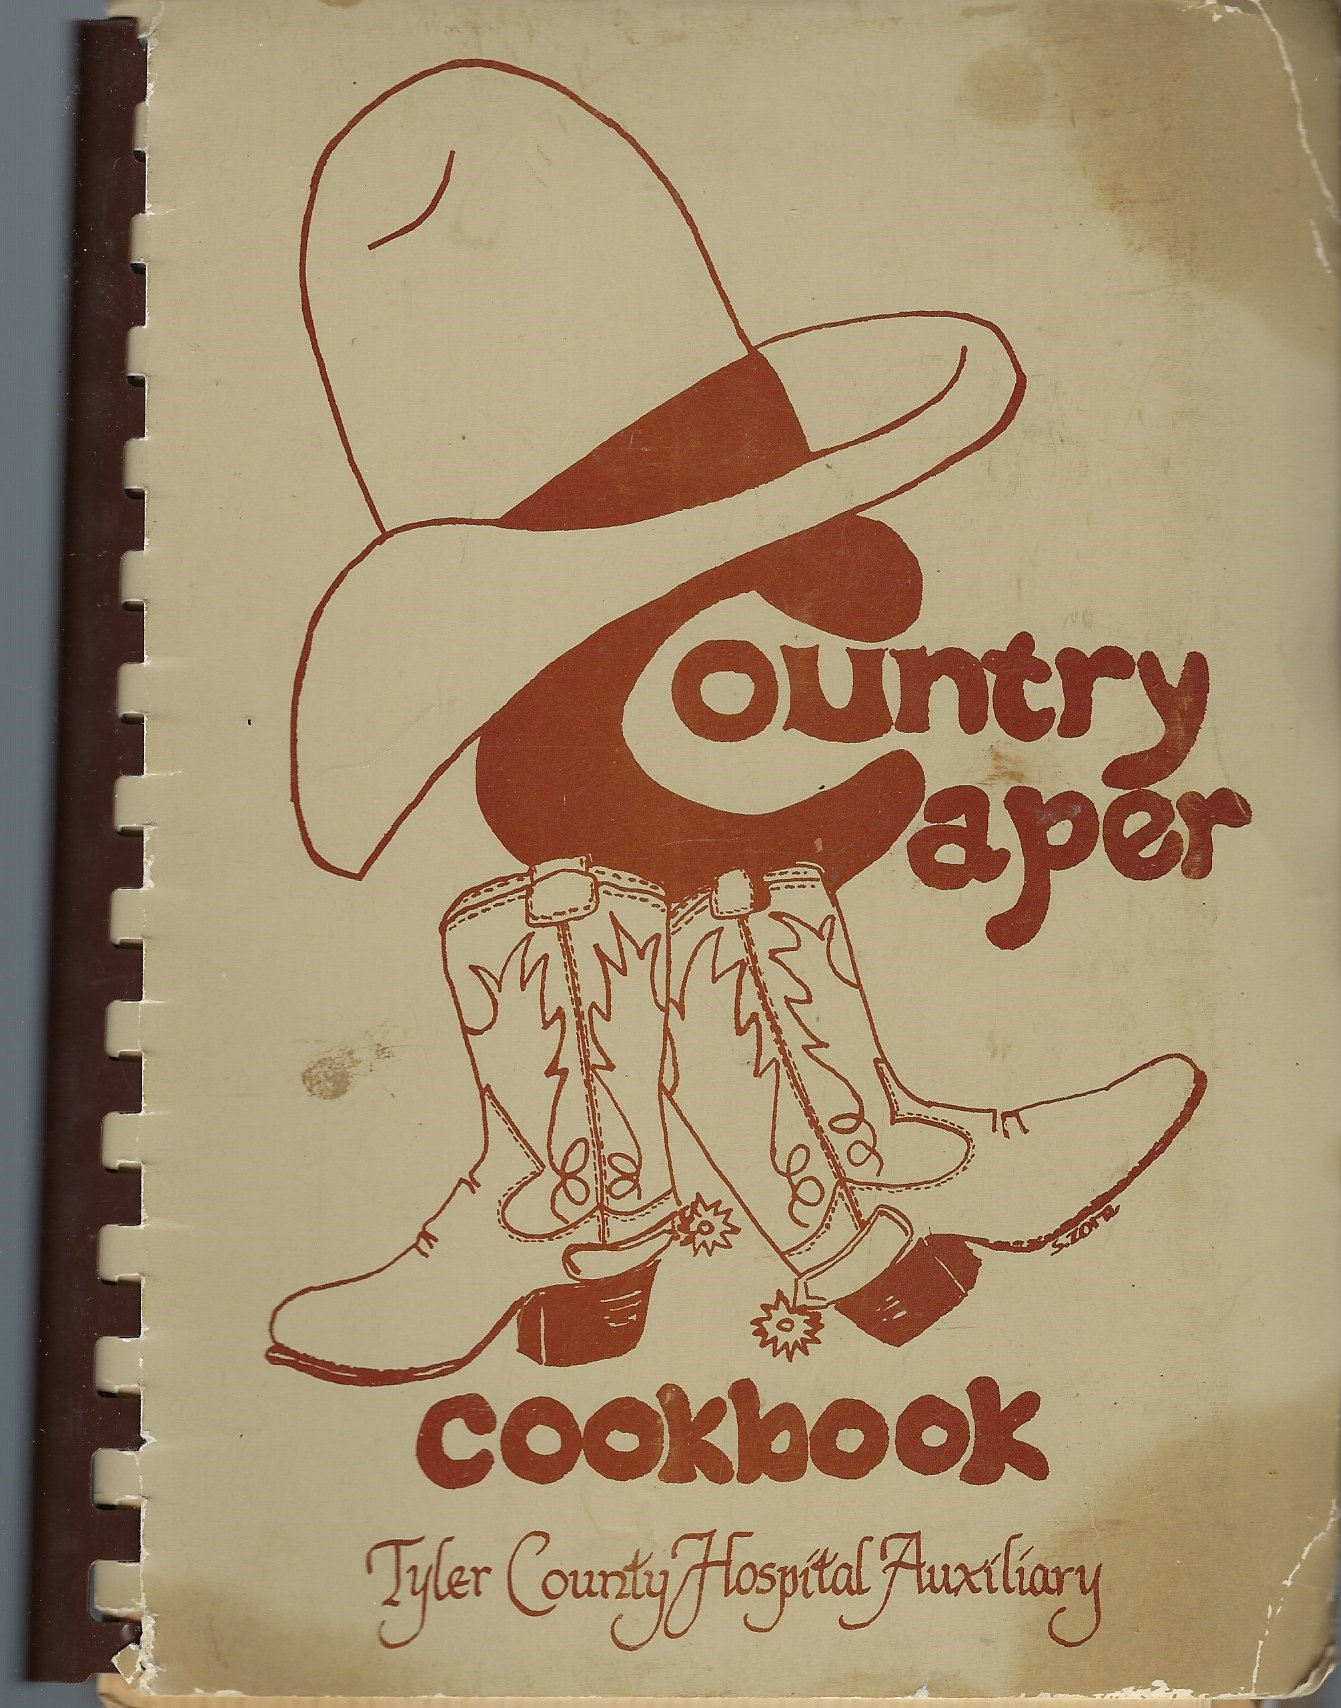 Woodville Texas Vintage 1984 Tyler County Hospital Auxiliary Country Caper Cookbook Tx Community Favorite Recipes Collectible Rare Book